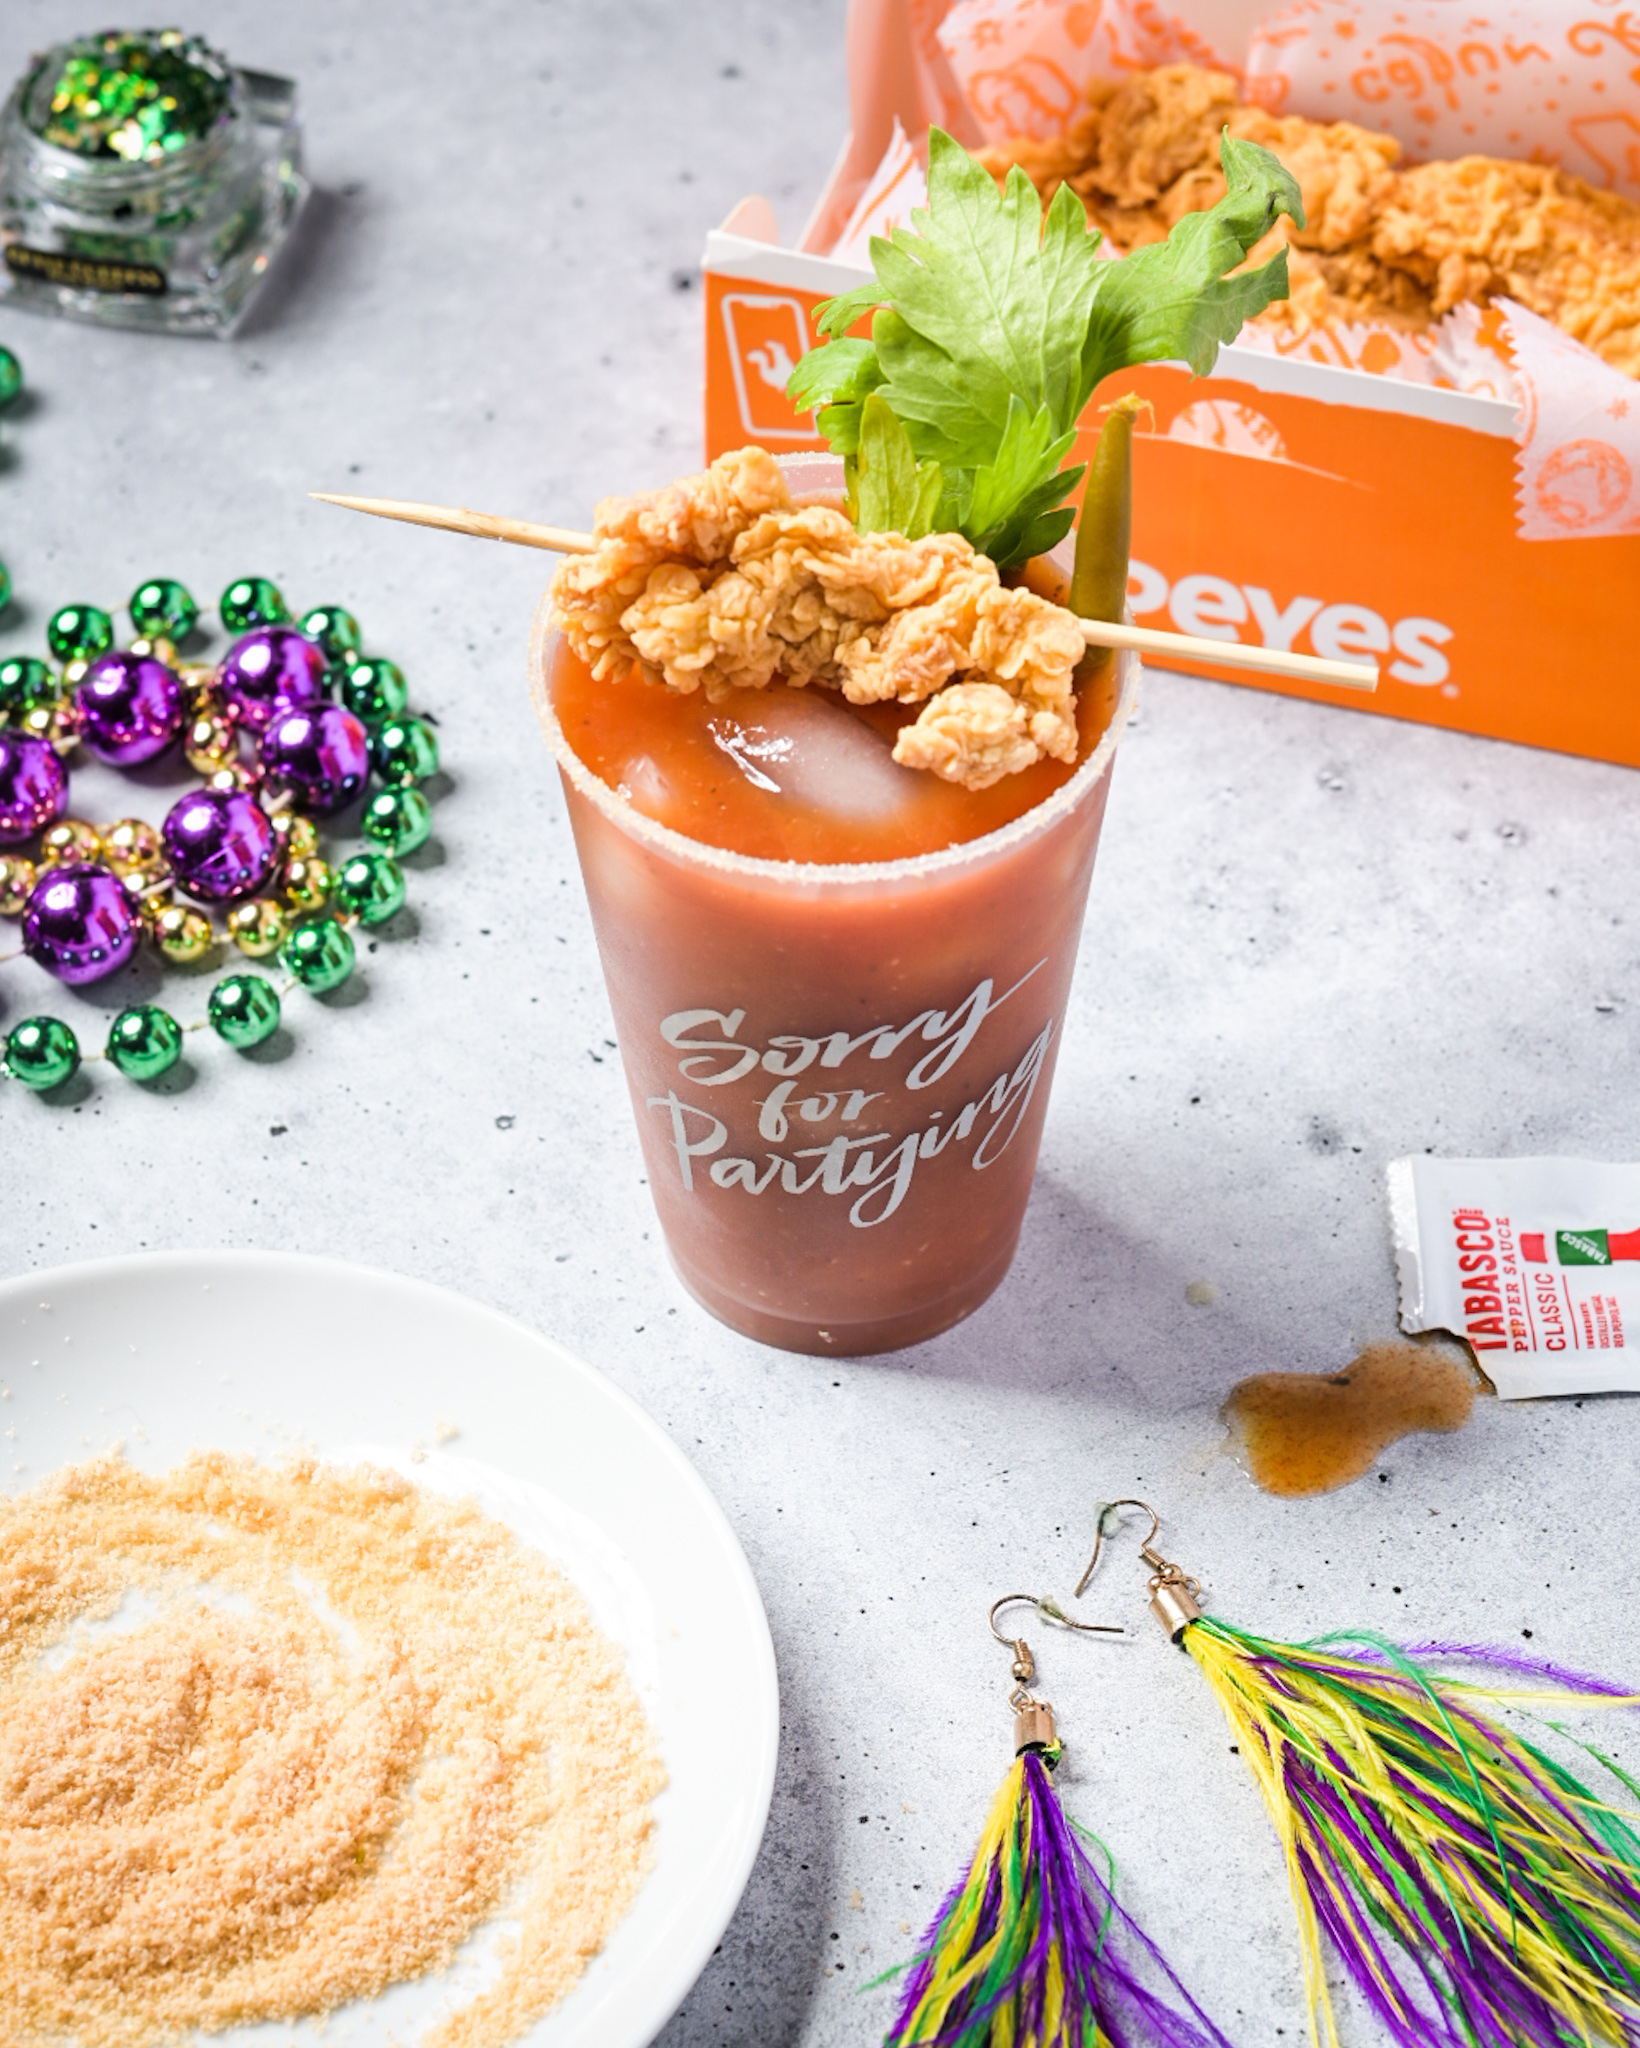 A Bloody Mardi with a Tabasco salt rim and a skewer of Popeye's chicken strips